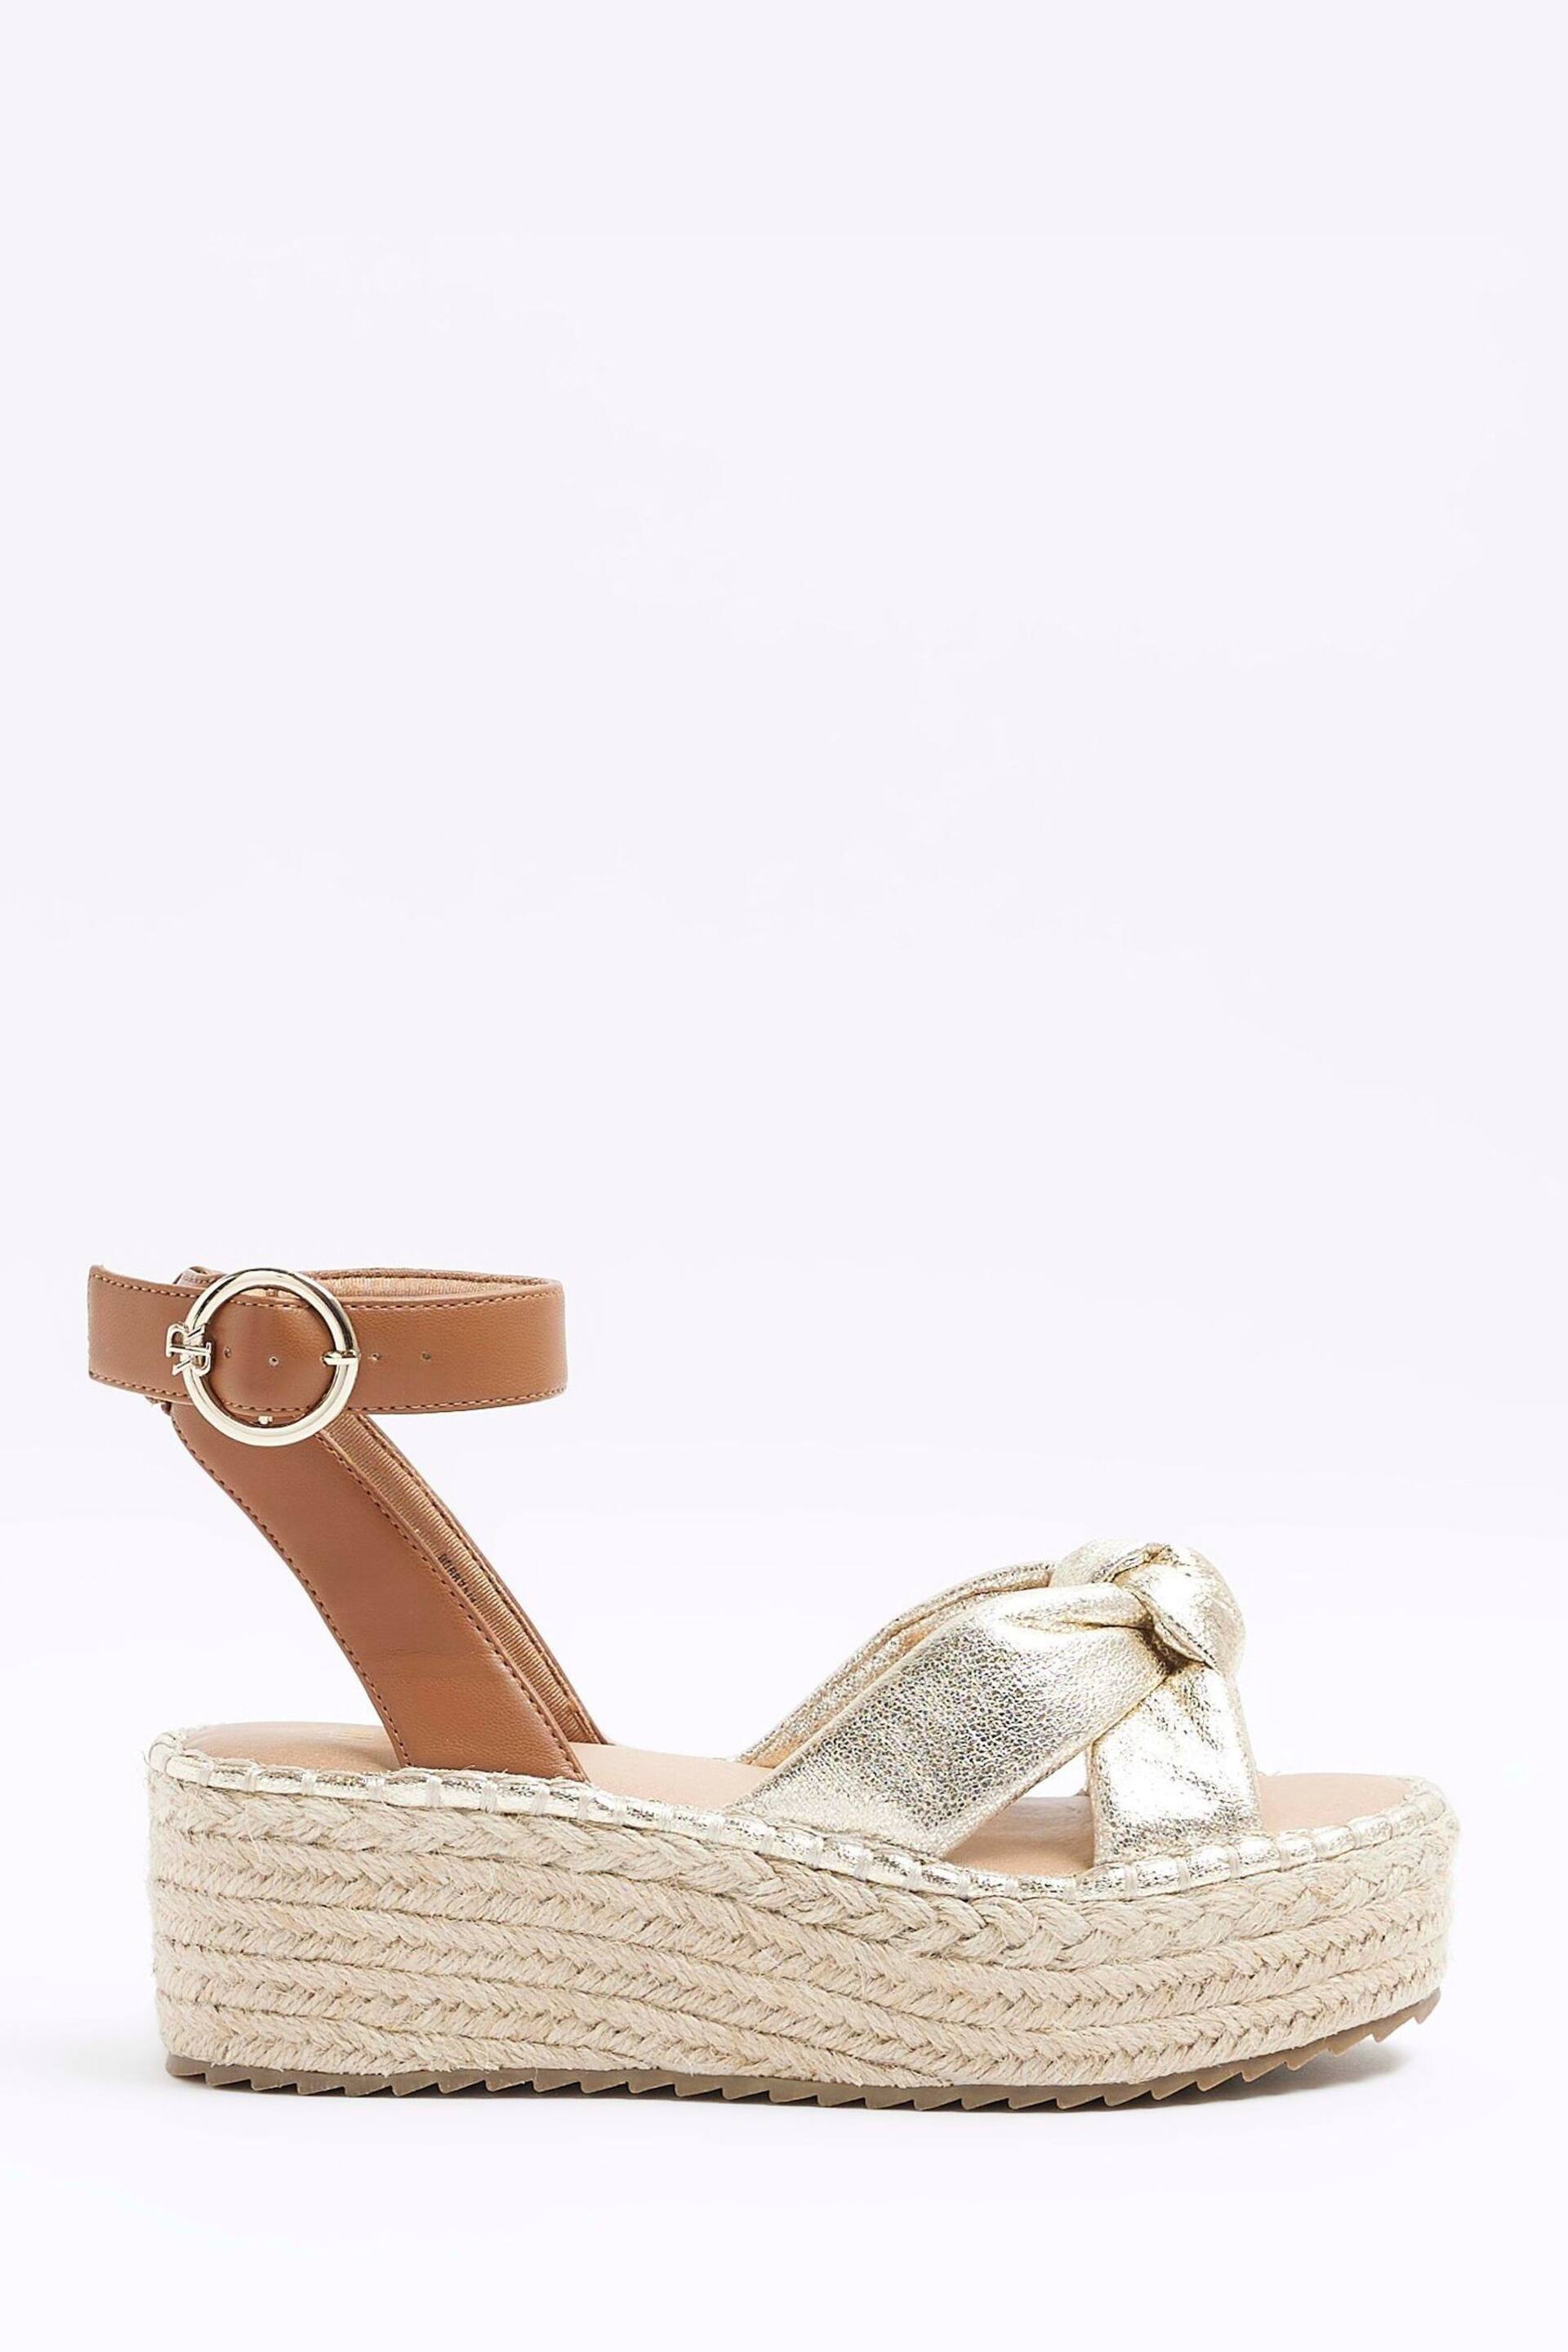 River Island Gold Two Part Espadrille Sandals - Image 2 of 5